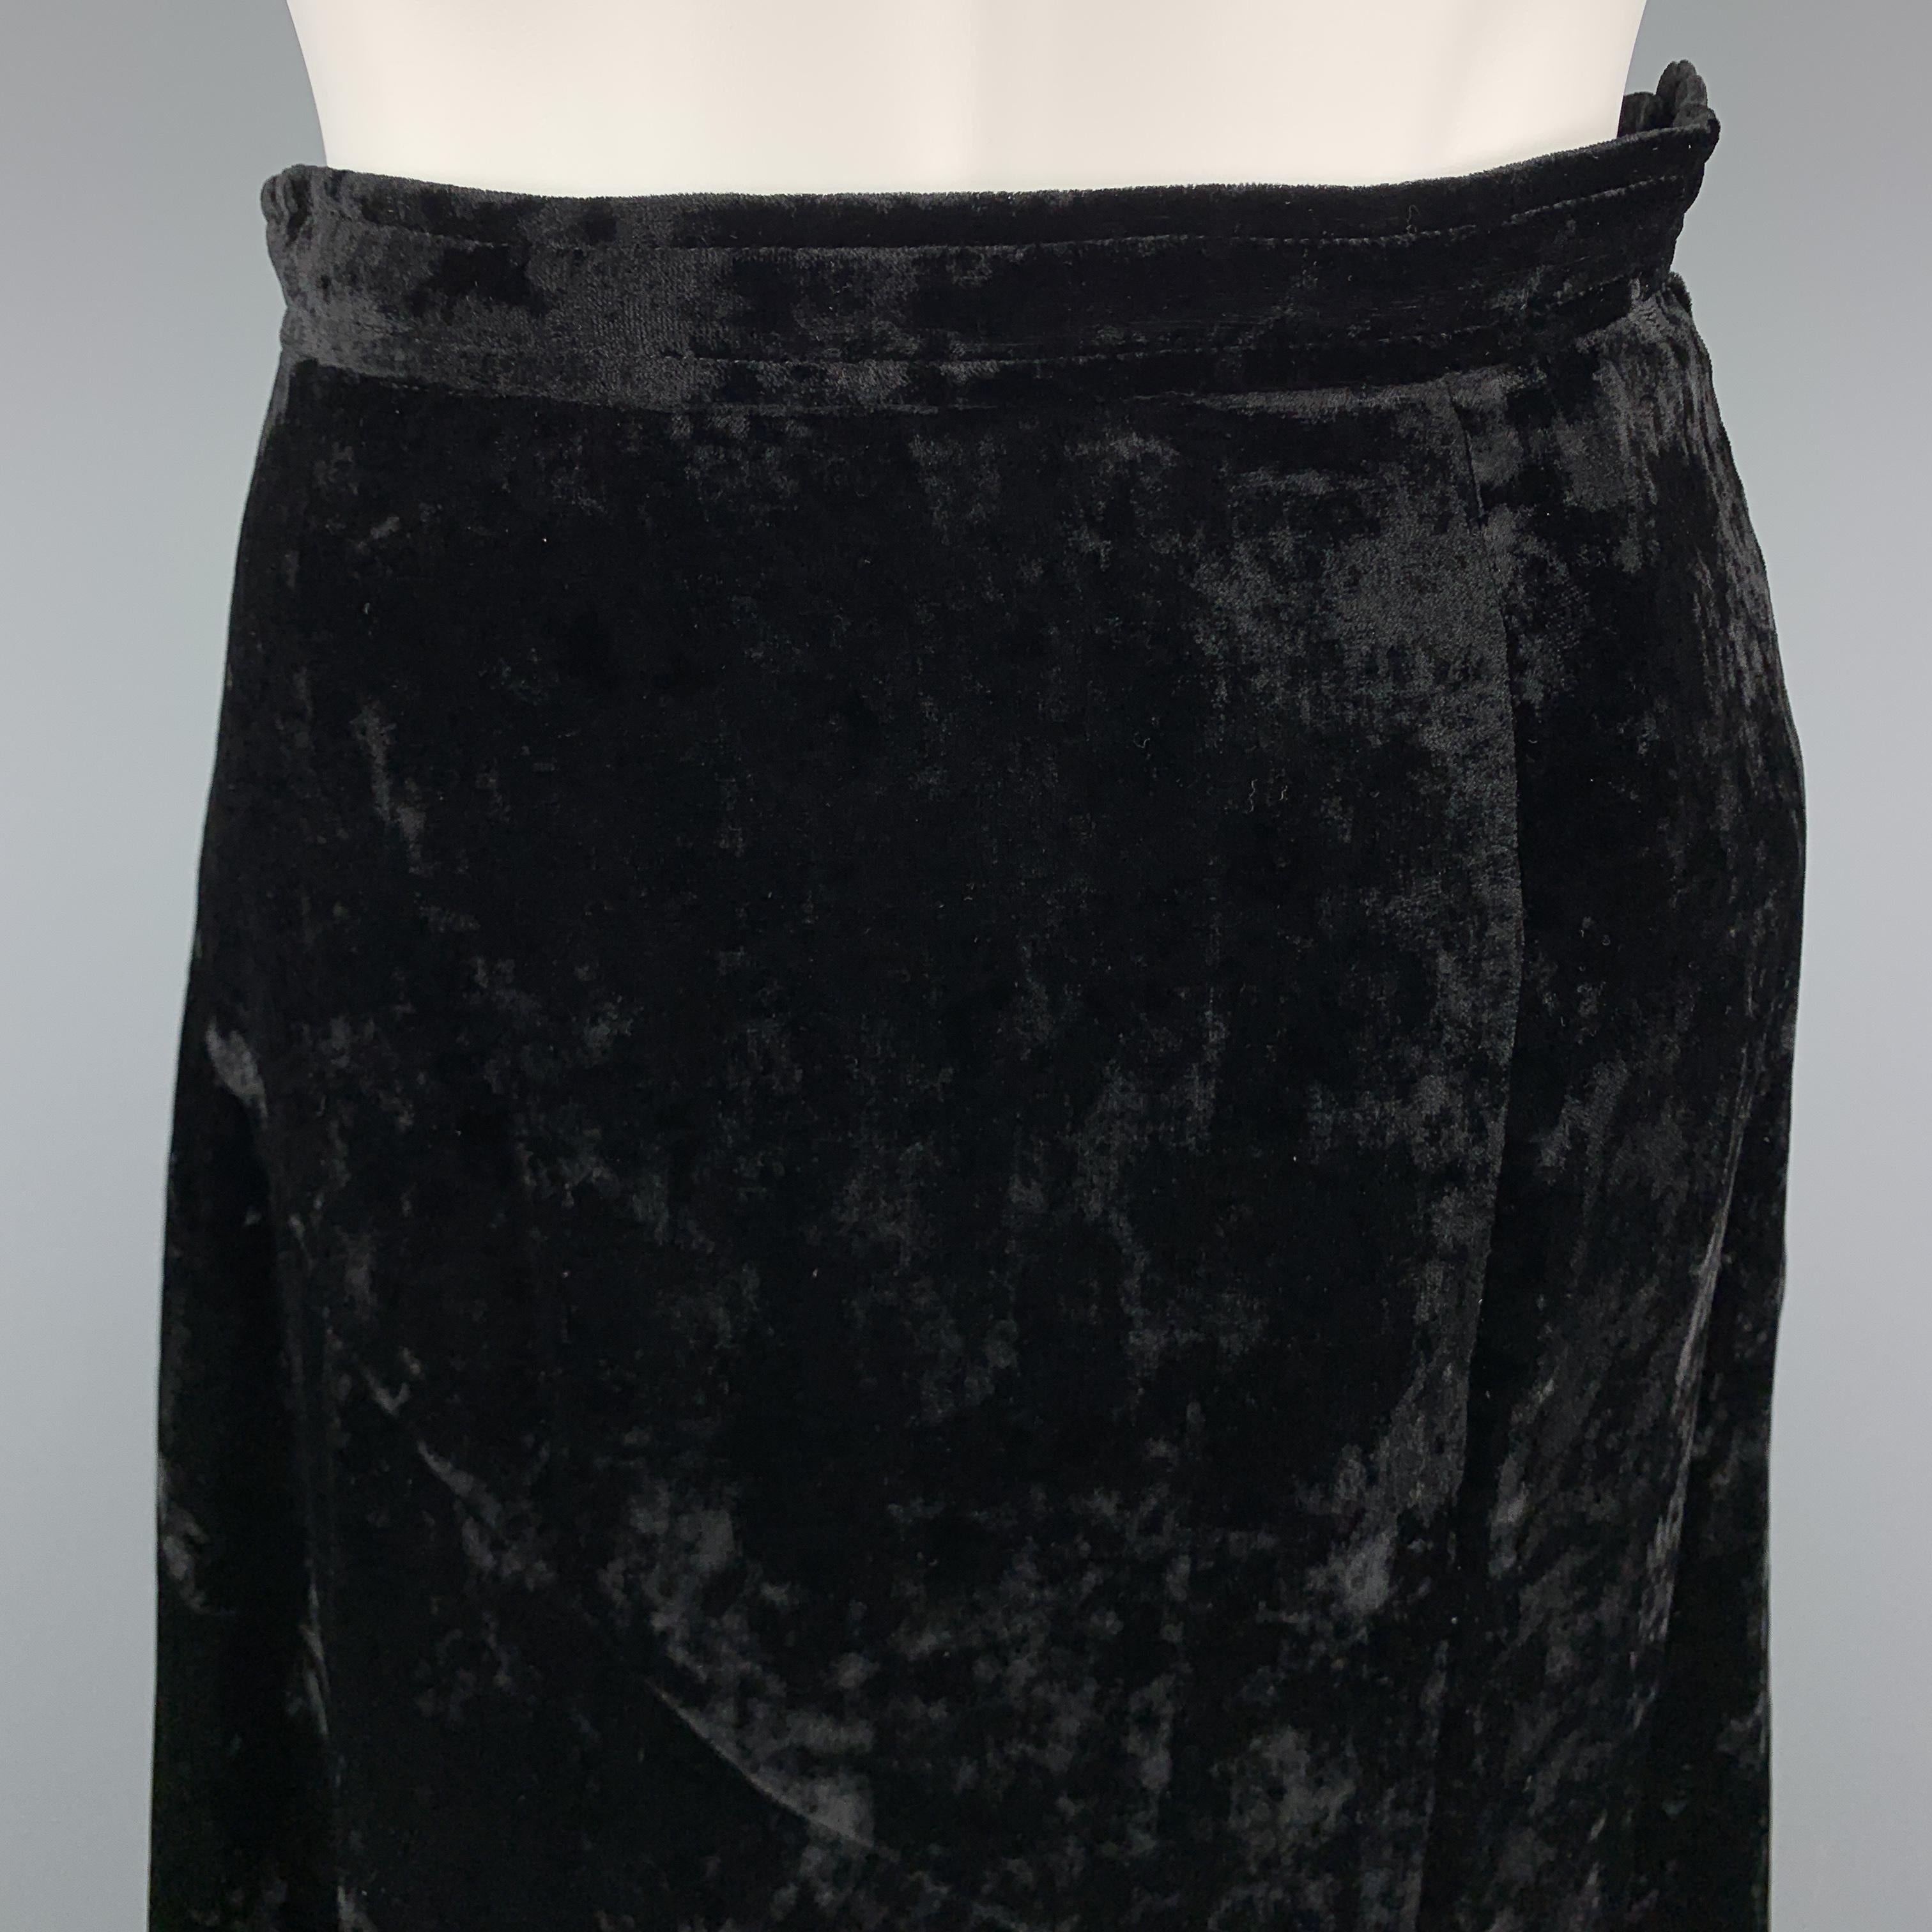 COMME des GARCONS Asymmetrical Skirt comes in a black solid polyester / rayon velvet material, in a knee length, featuring large black beads and a side zipper. Made in Japan.

Excellent Pre-Owned Condition.
Marked: S

Measurements:

Waist: 25 in.